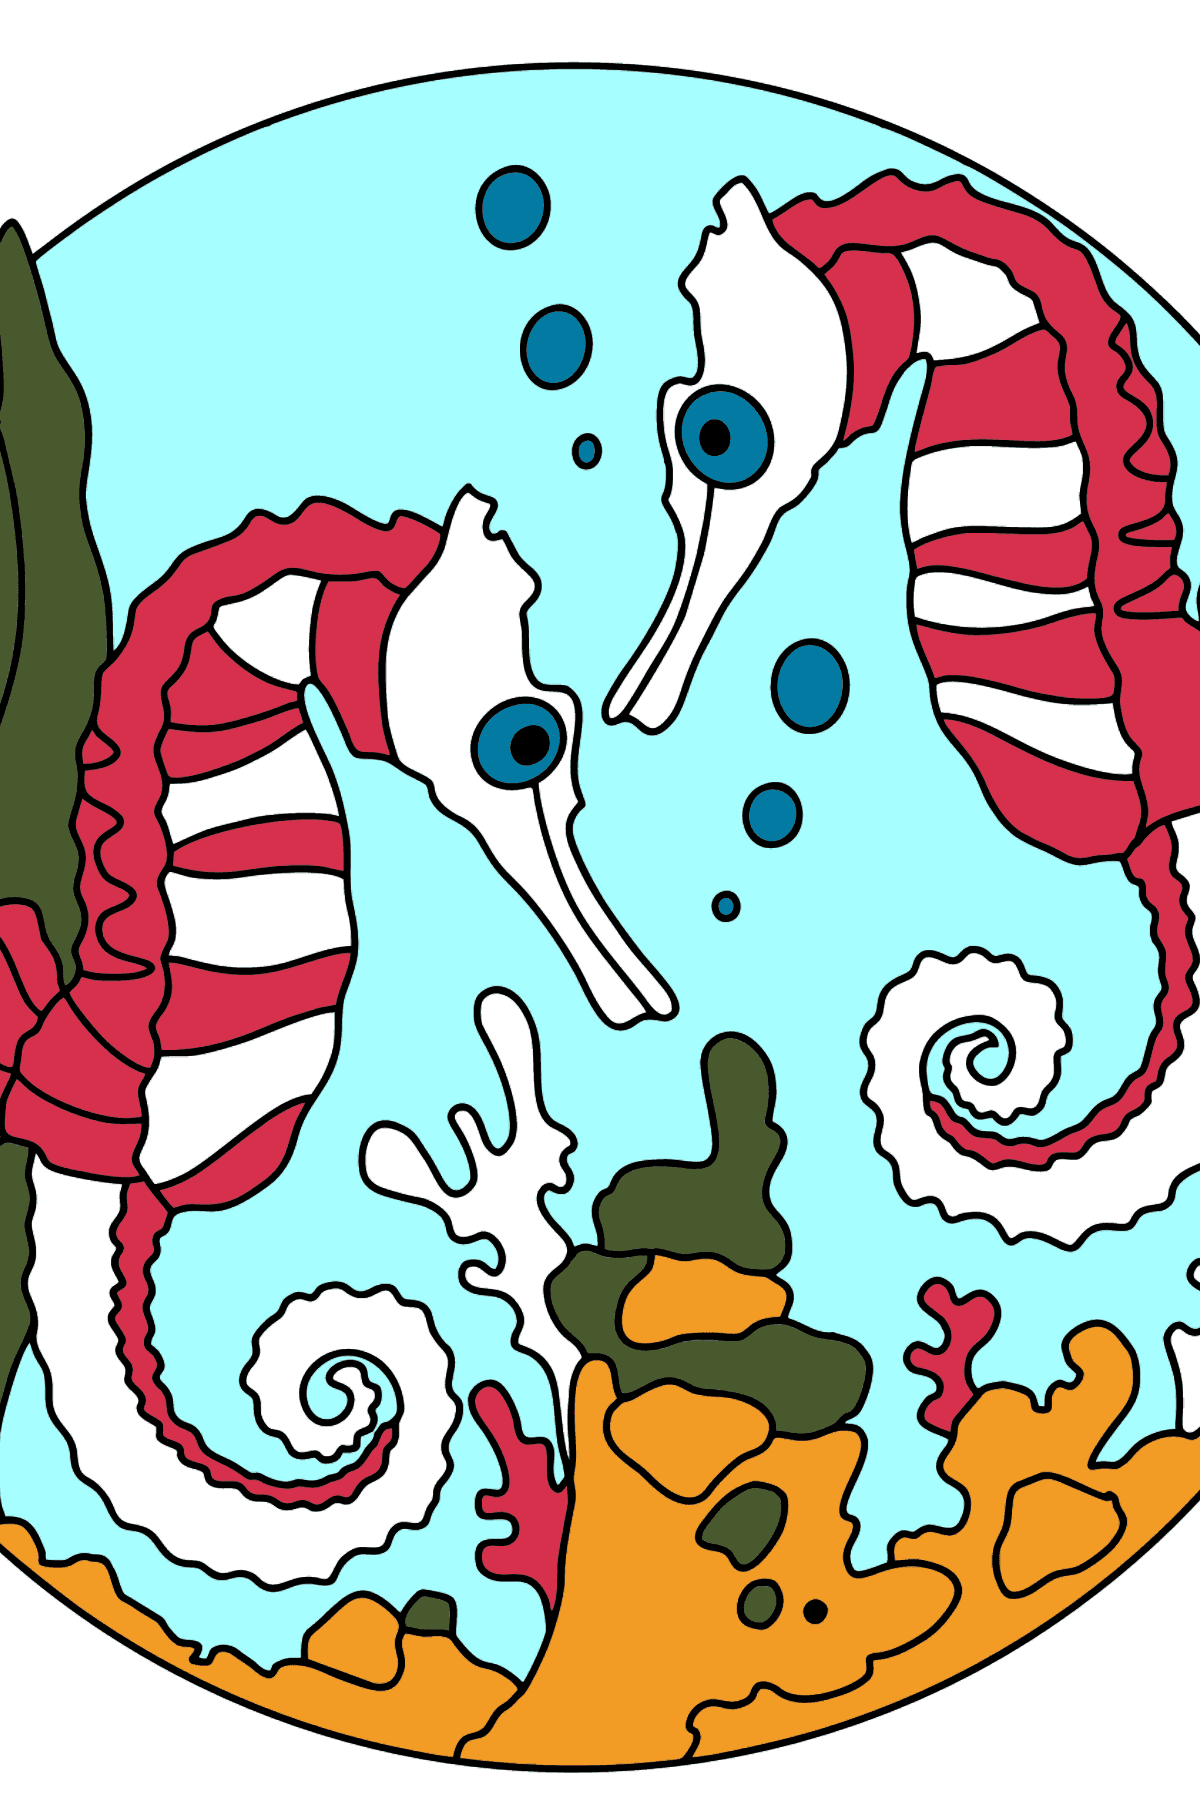 Seahorses are Playing Energetically Coloring Page - Coloring Pages for Kids